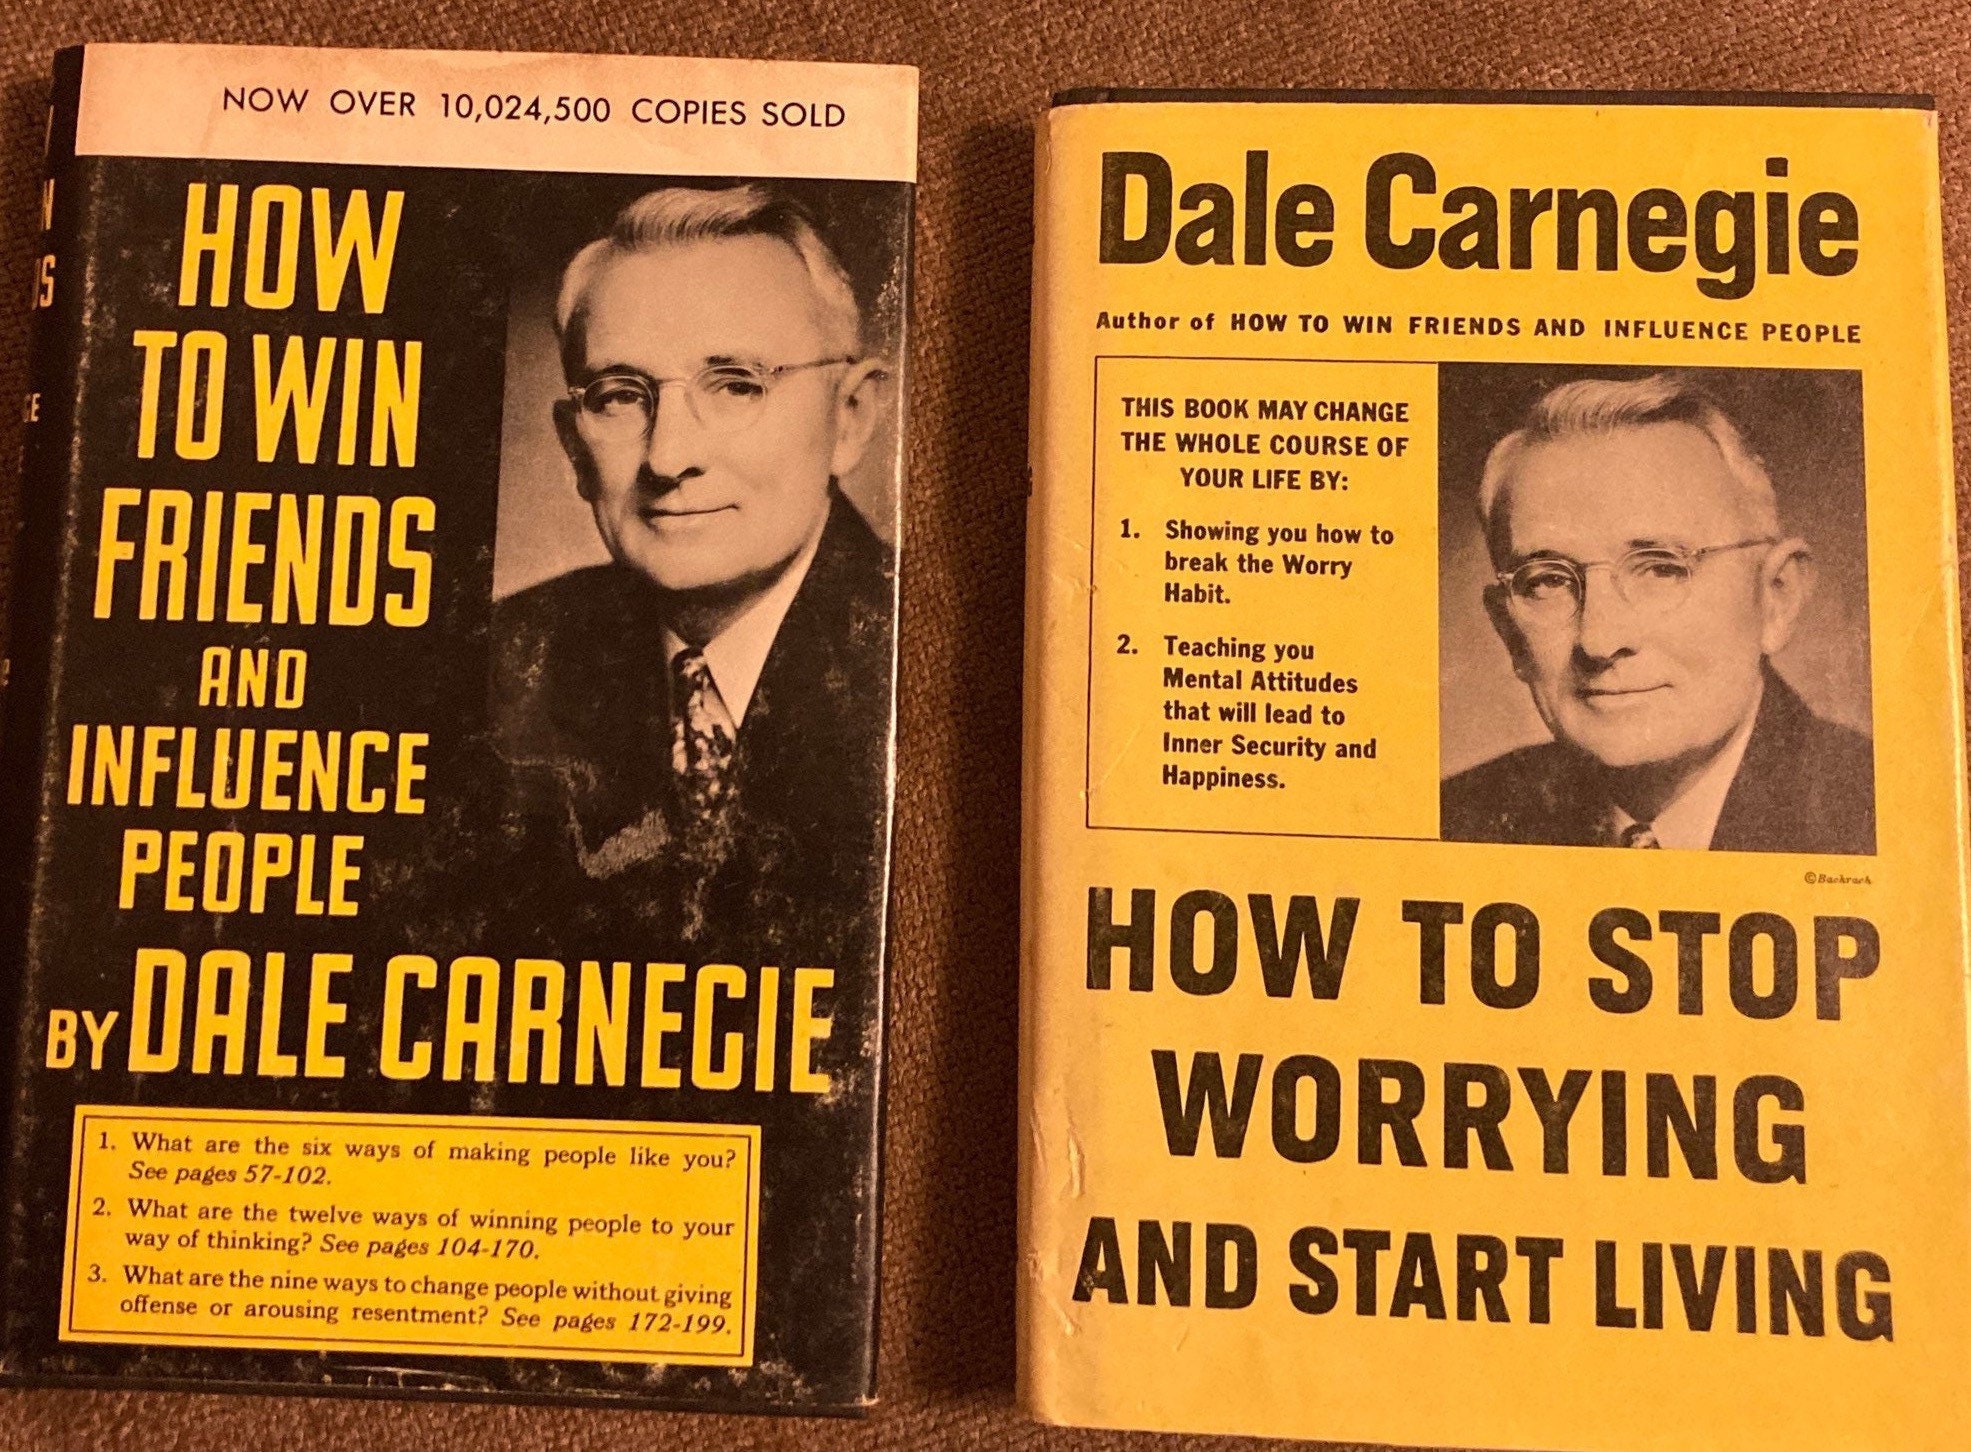 Lessons From Dale Carnegie's 'How to Win Friends and Influence People